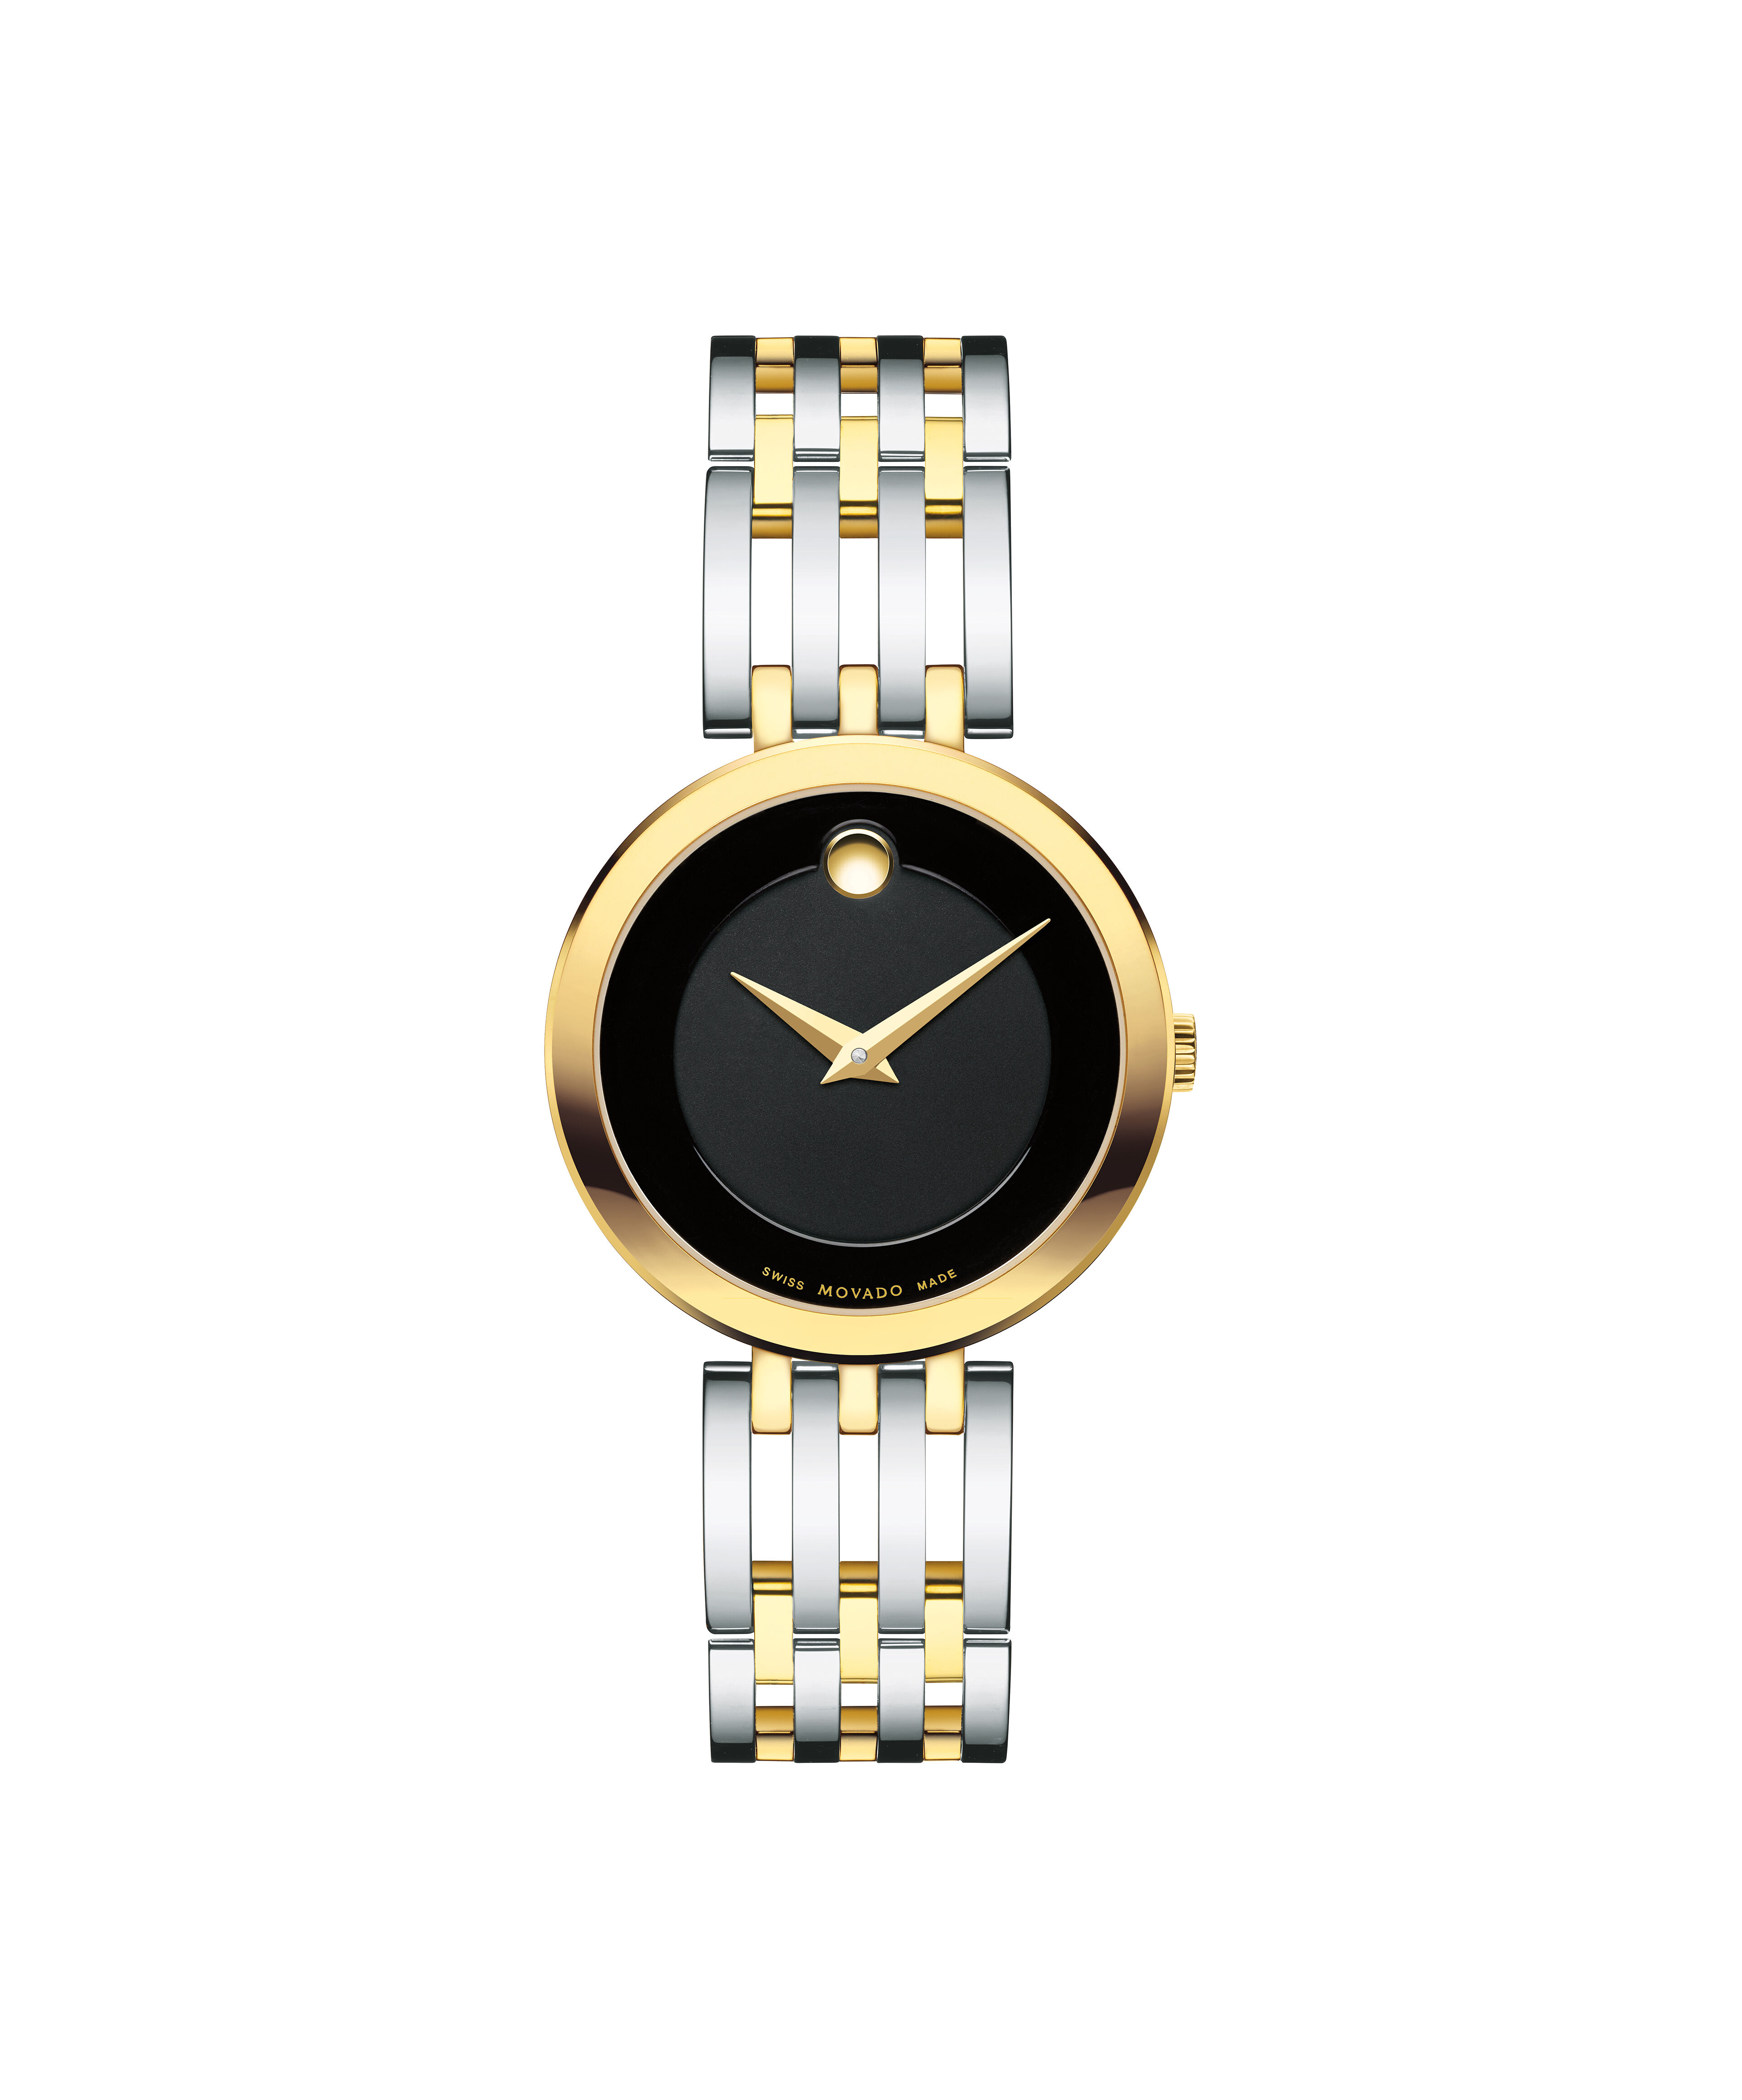 Movado Museum Classic Yellow Gold PVD-finished Stainless Steel ref. 87-45-882Movado Museum Concerto 84.G4.1842 Stainless Steel Ladies 26mm